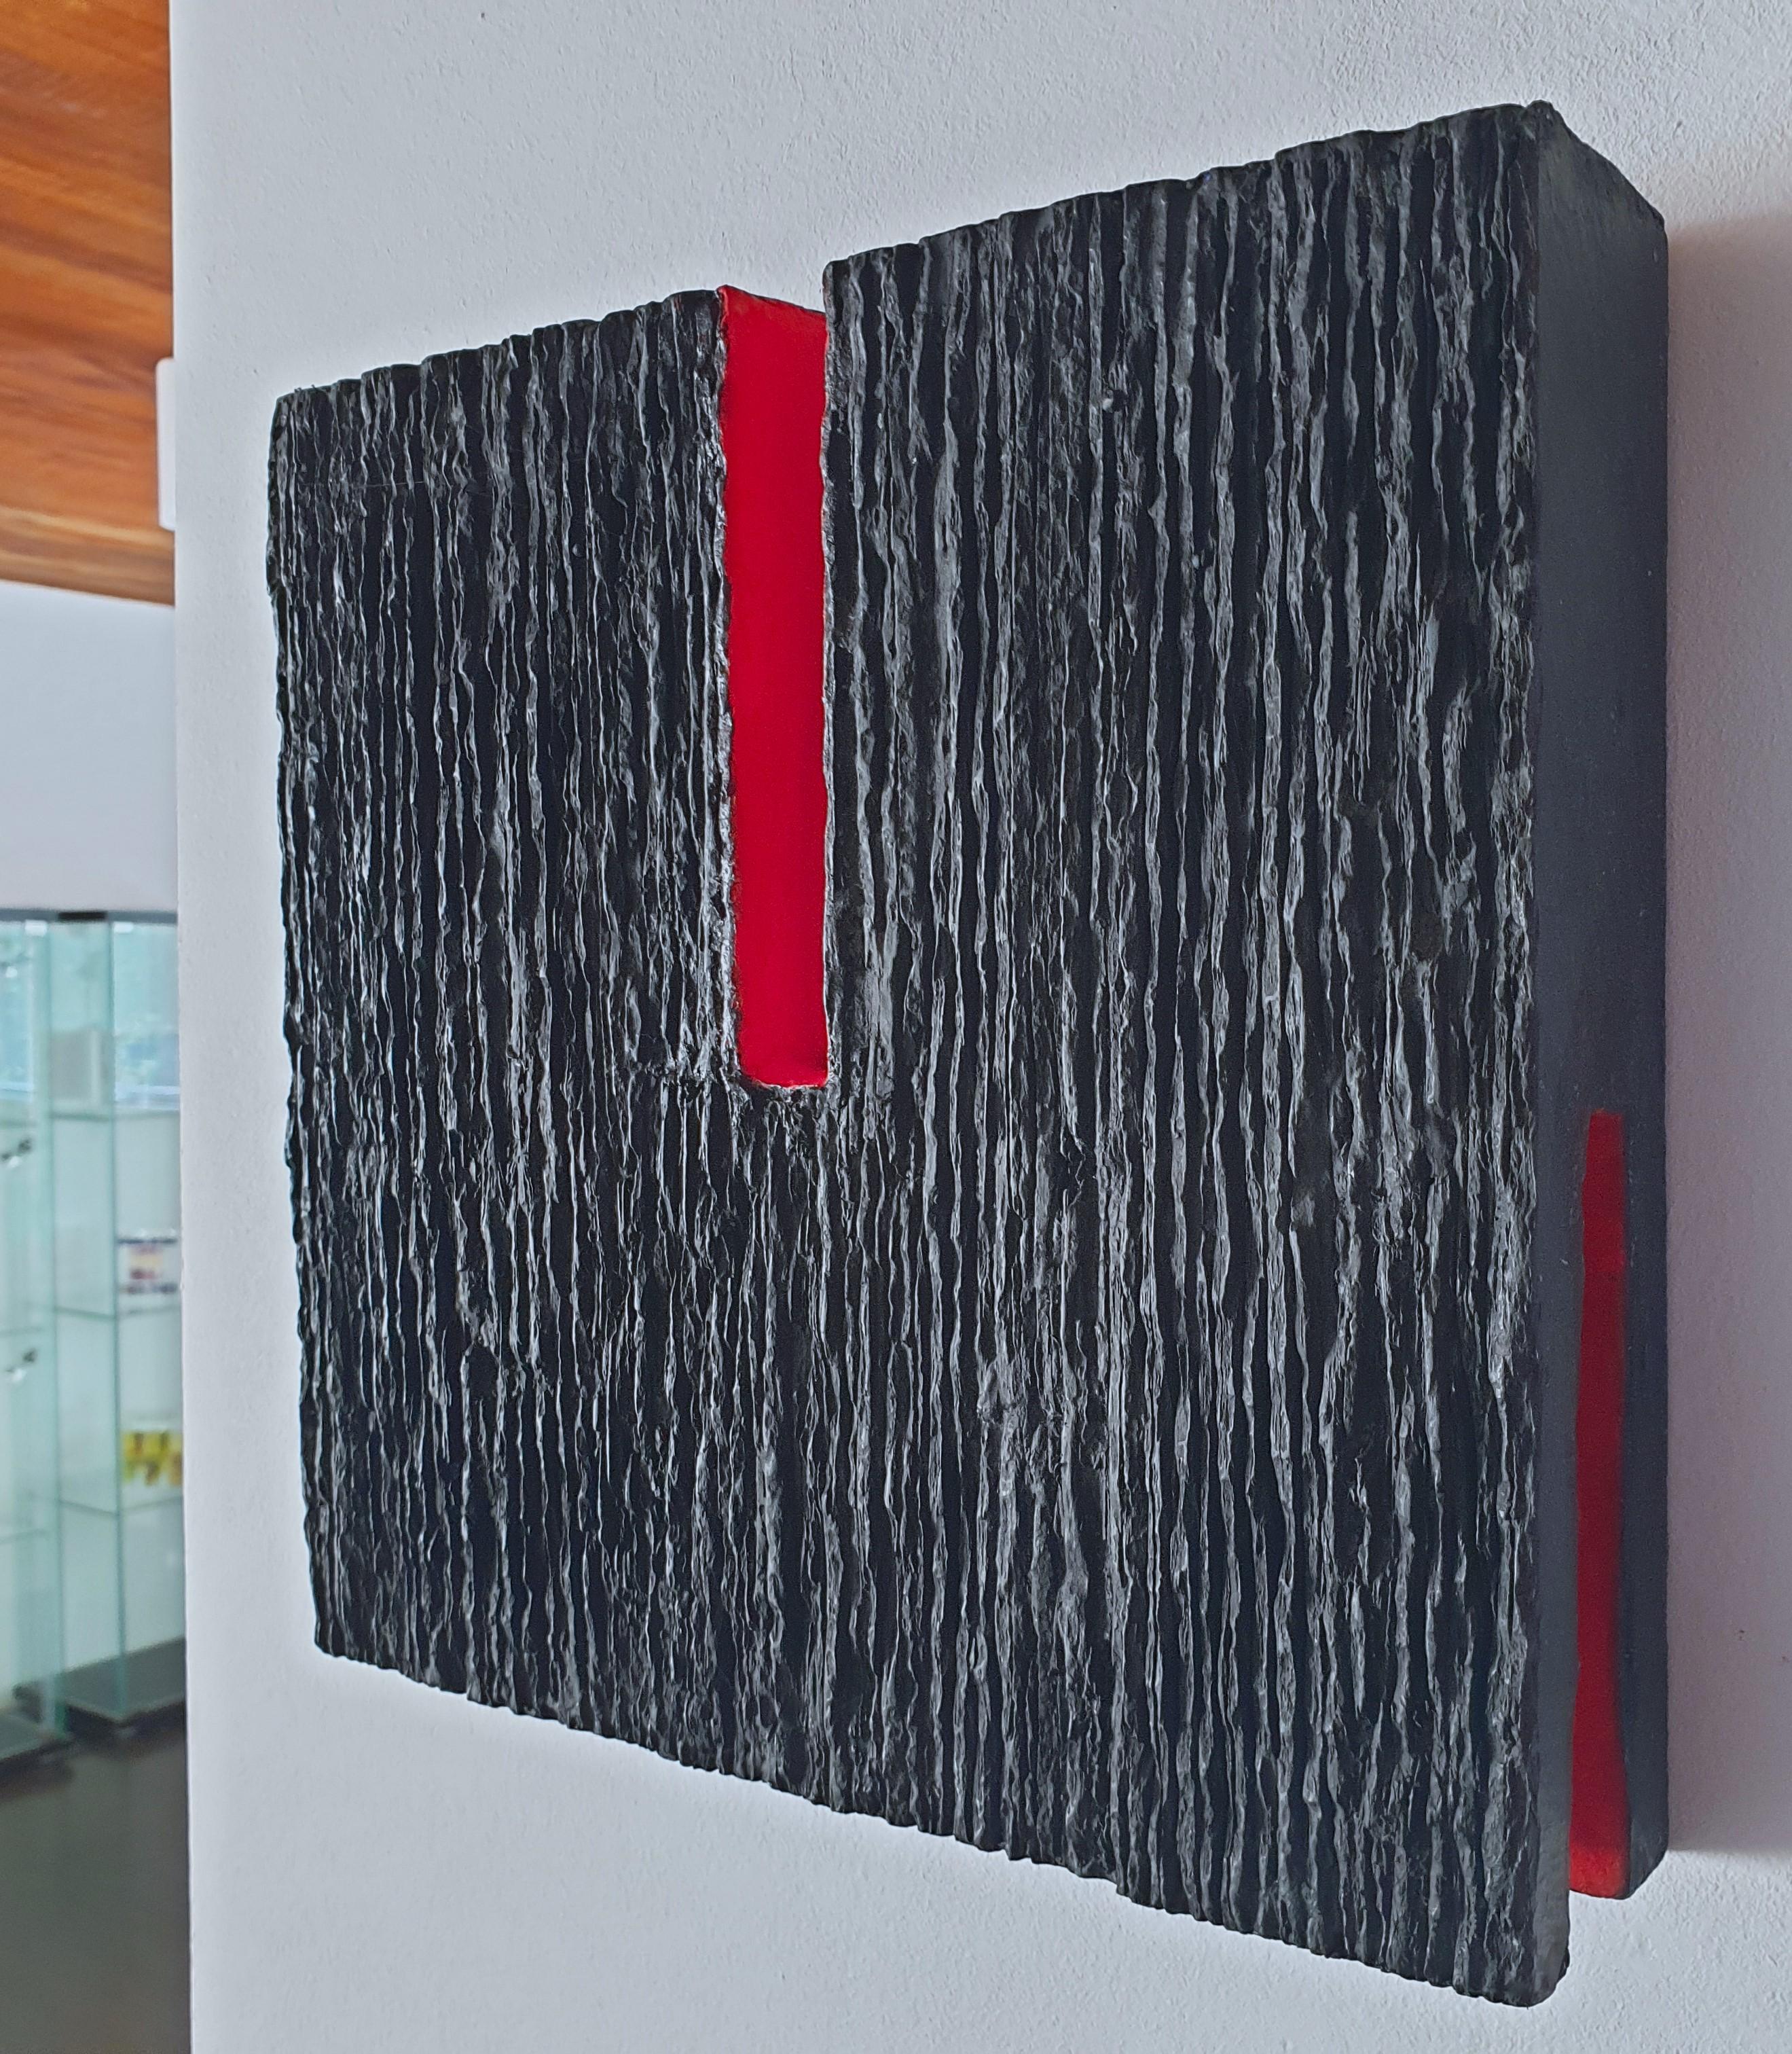 Center - black red contemporary modern abstract sculpture painting relief - Contemporary Sculpture by Michiel Jansen